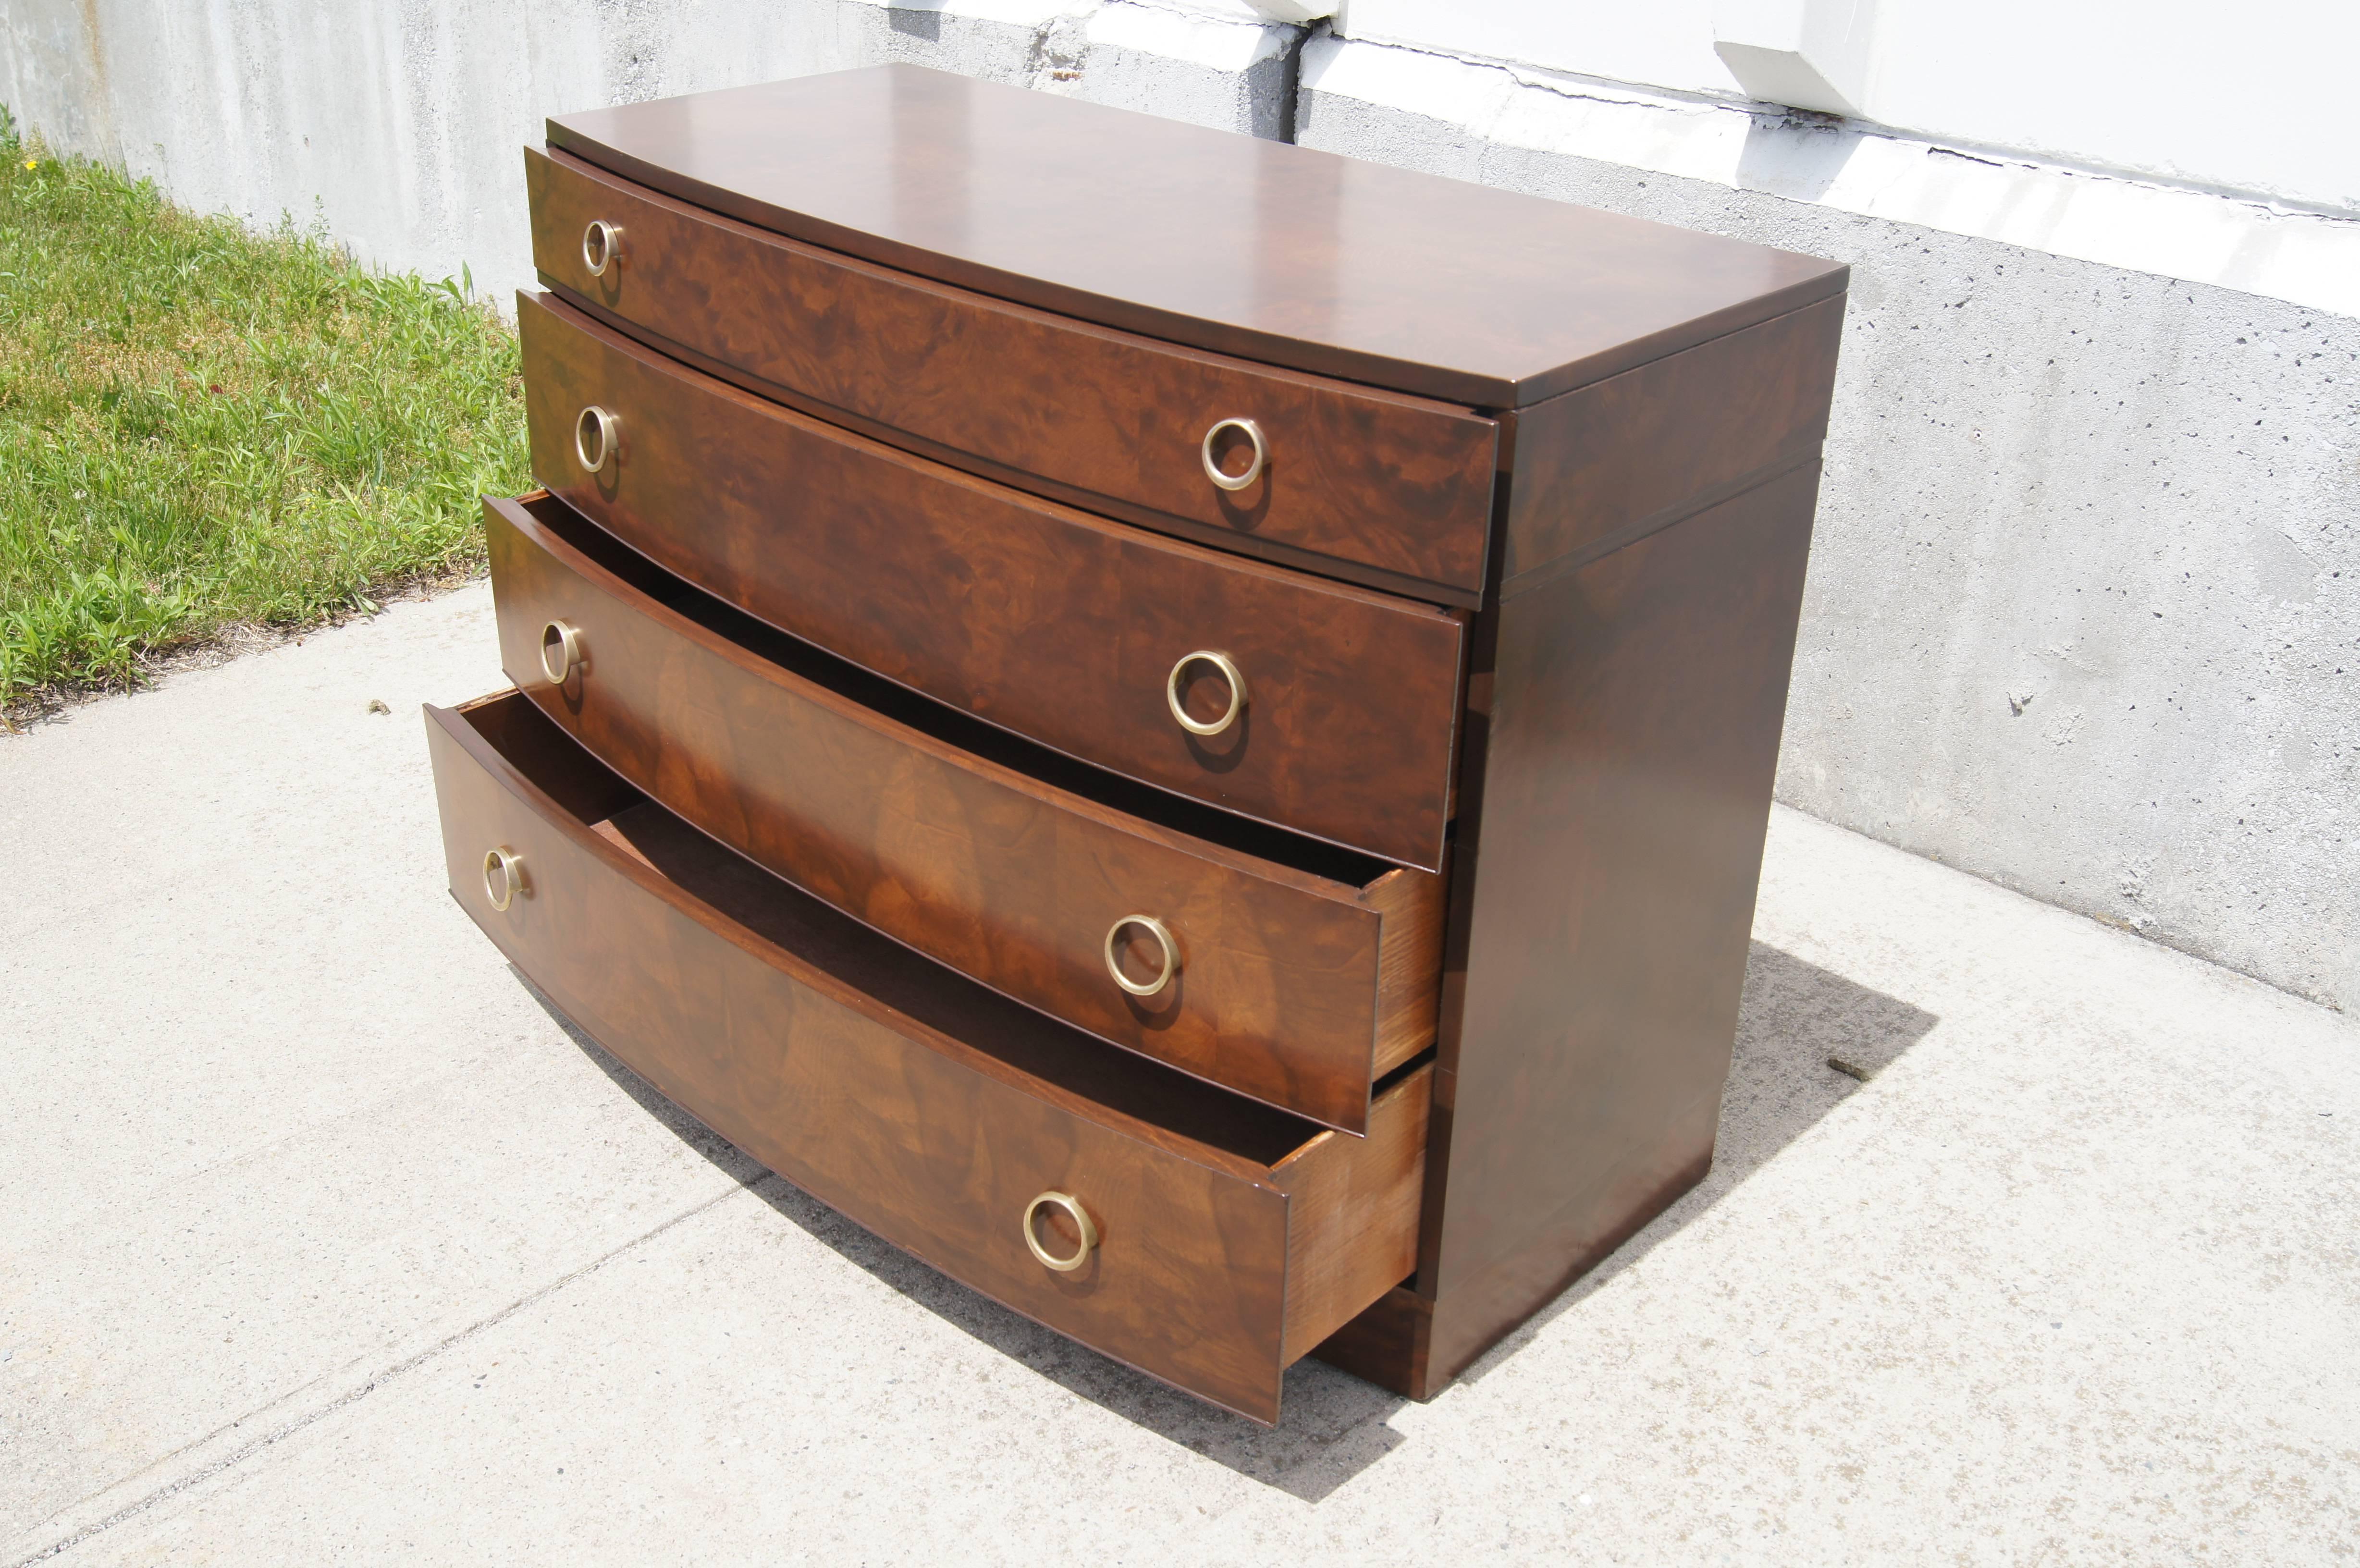 This bow-front dresser is a great example of American Art Deco furniture from the 1930s. Raised circular brass pulls complement the handsome myrtle burl.

